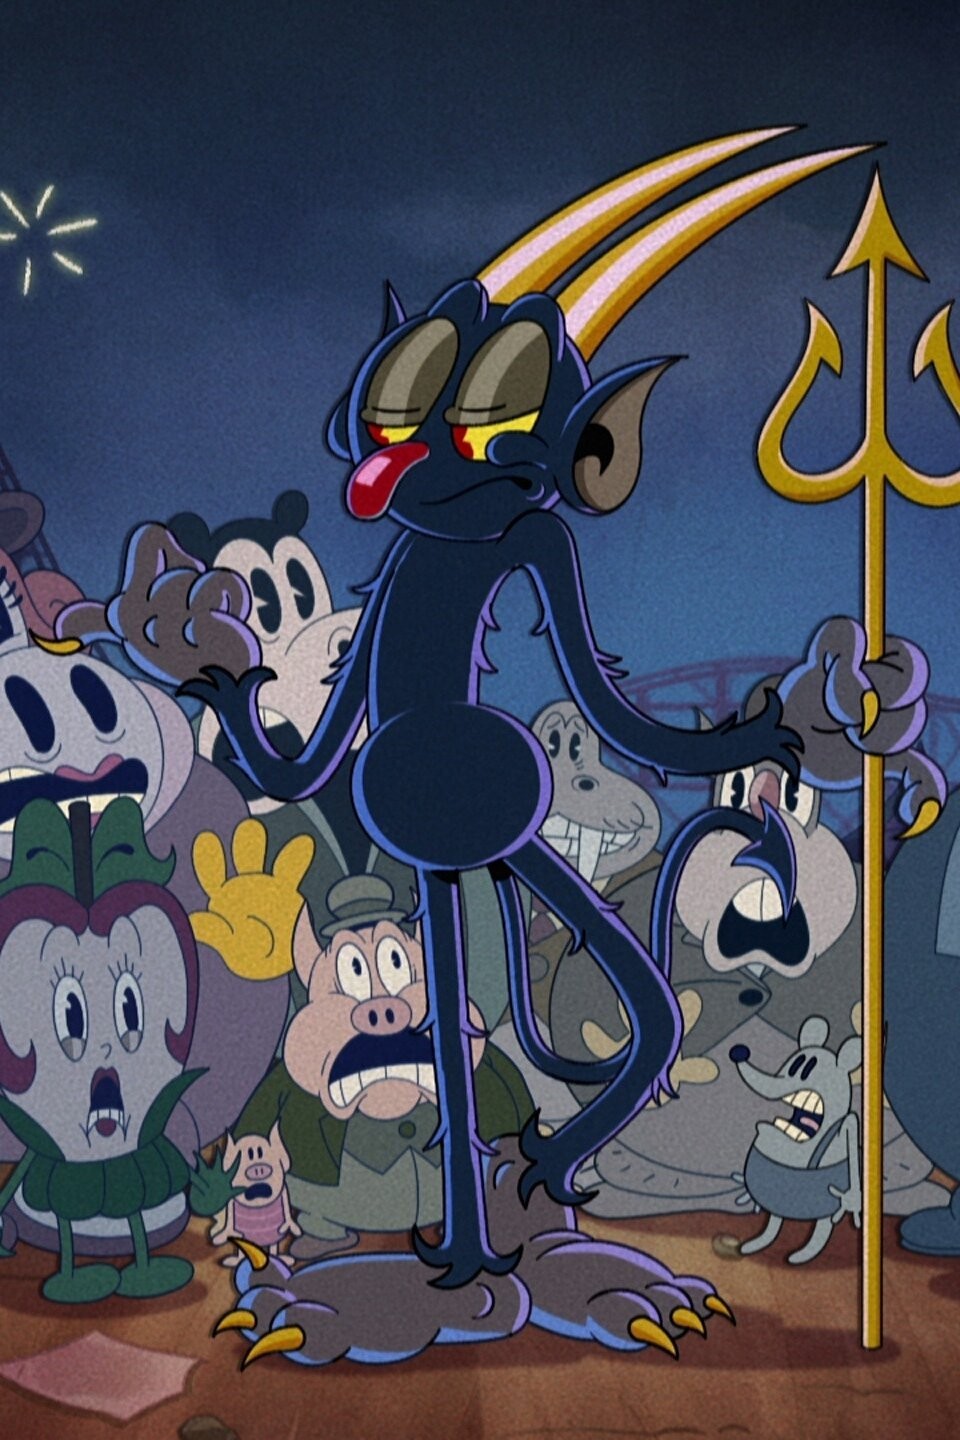 The Cuphead Show Preview: It's The Devil In The Details for The Devil